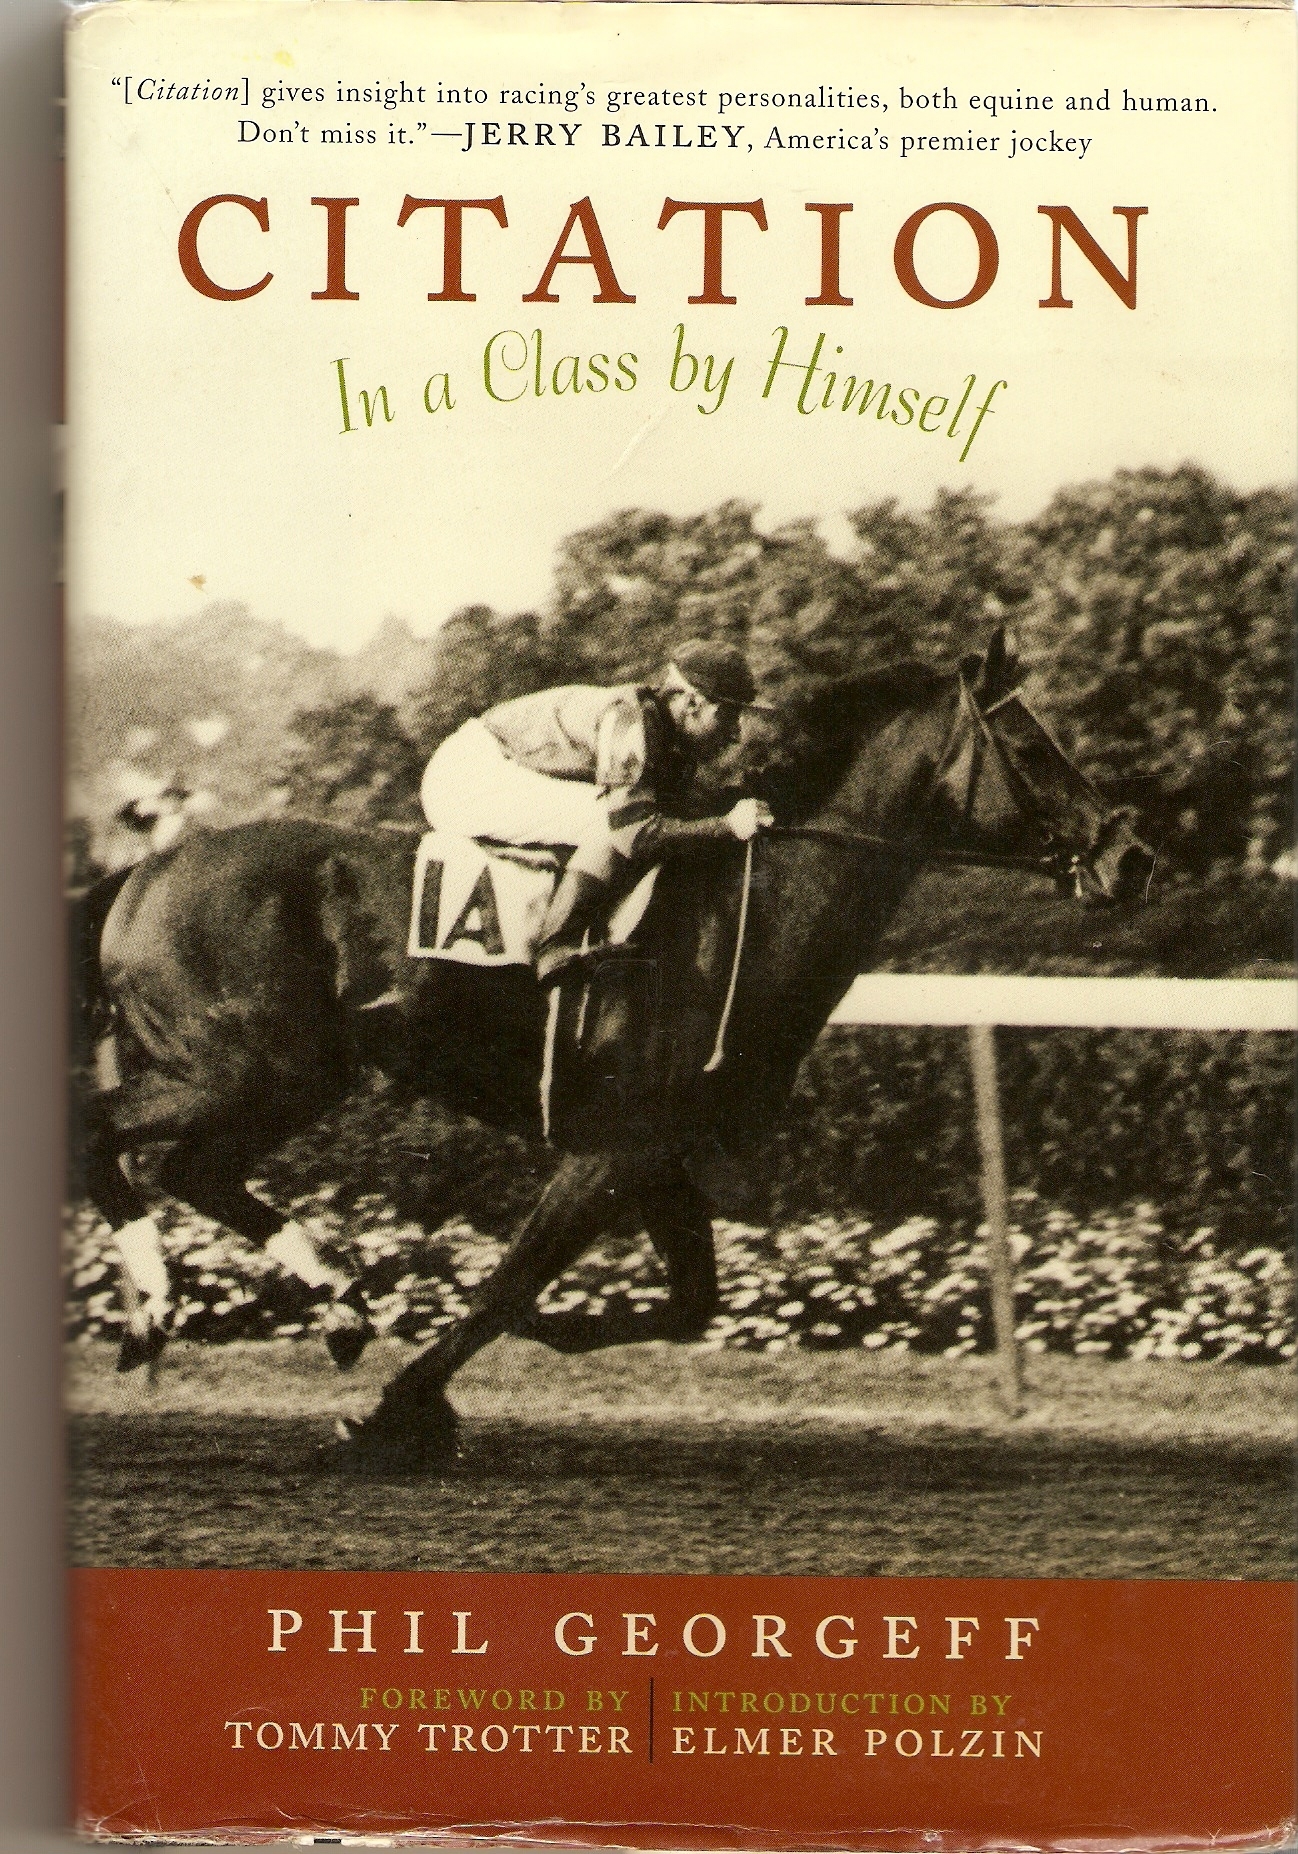 Cover of Citation In A Class By Himself written by Phil Georgeff.